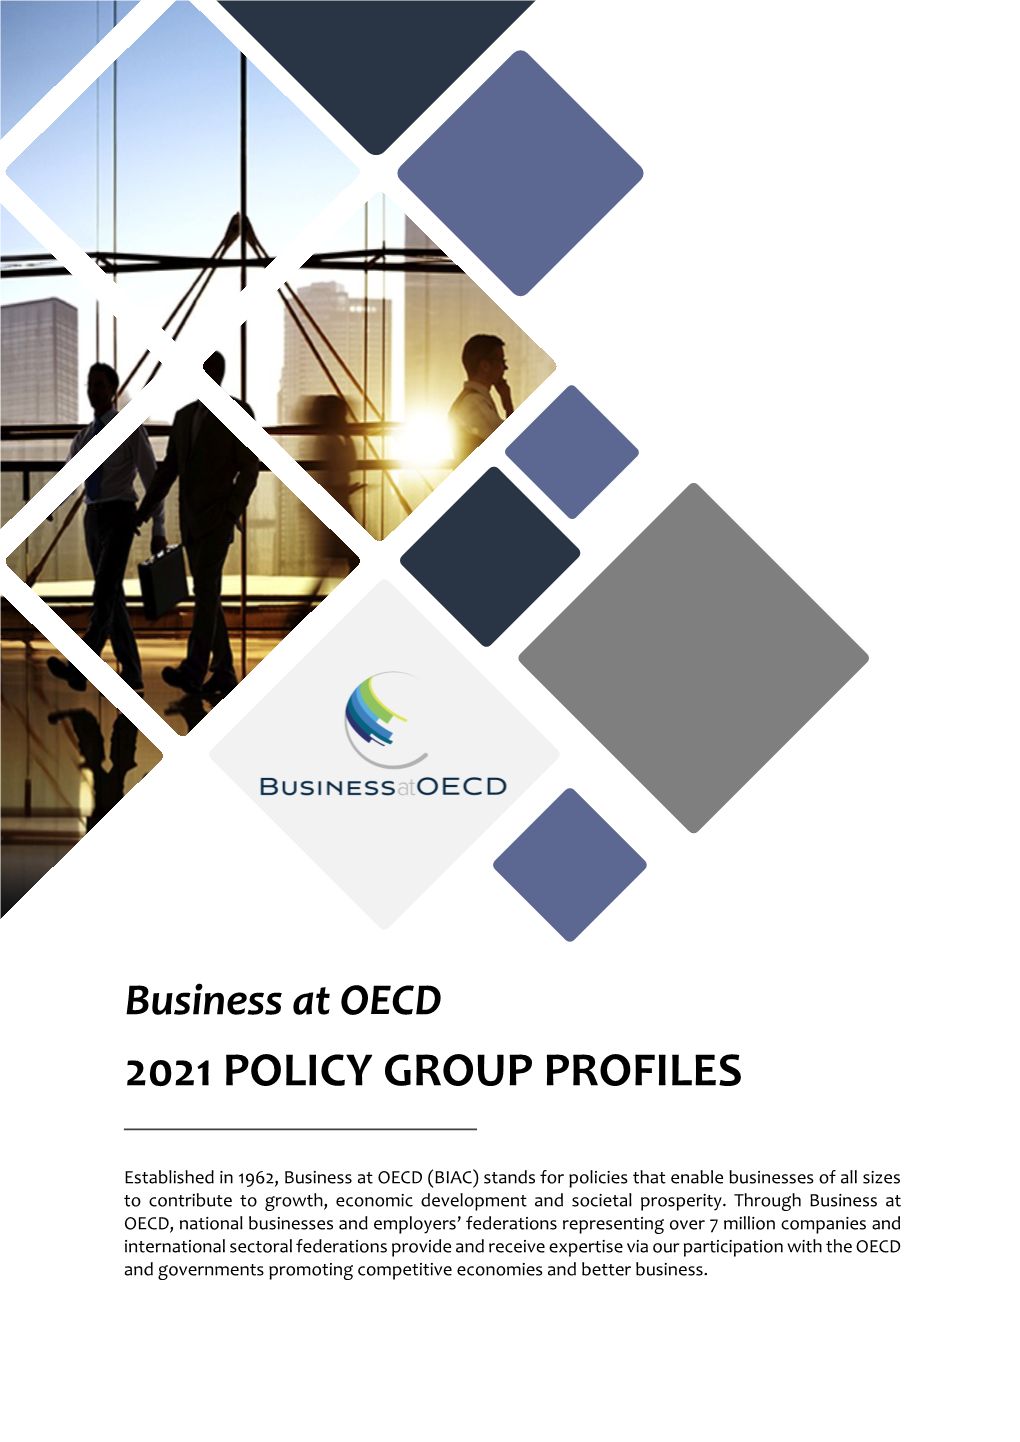 Business at OECD